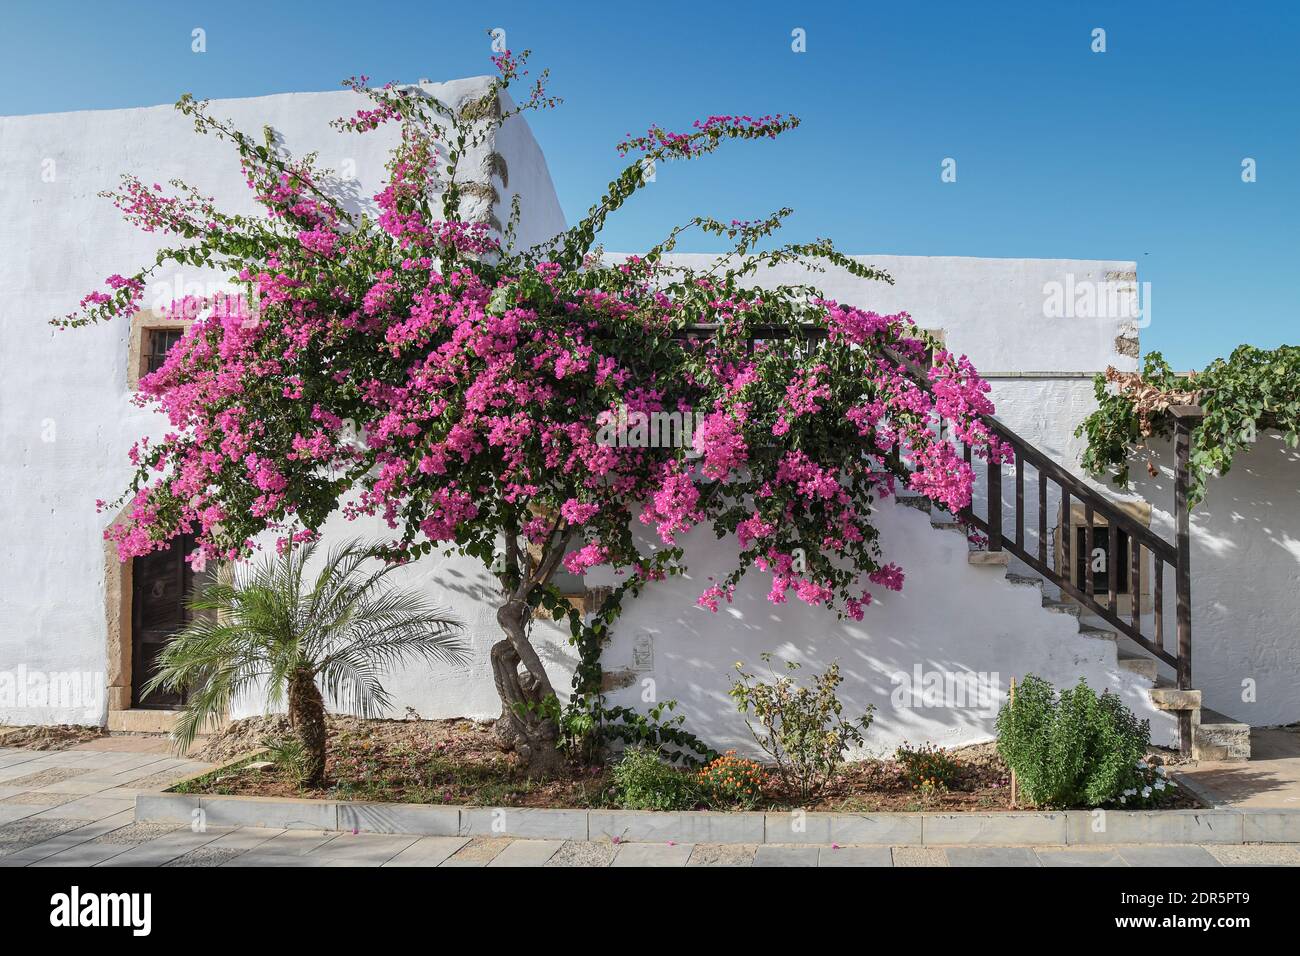 Pnk flower tree in front of a white building Stock Photo